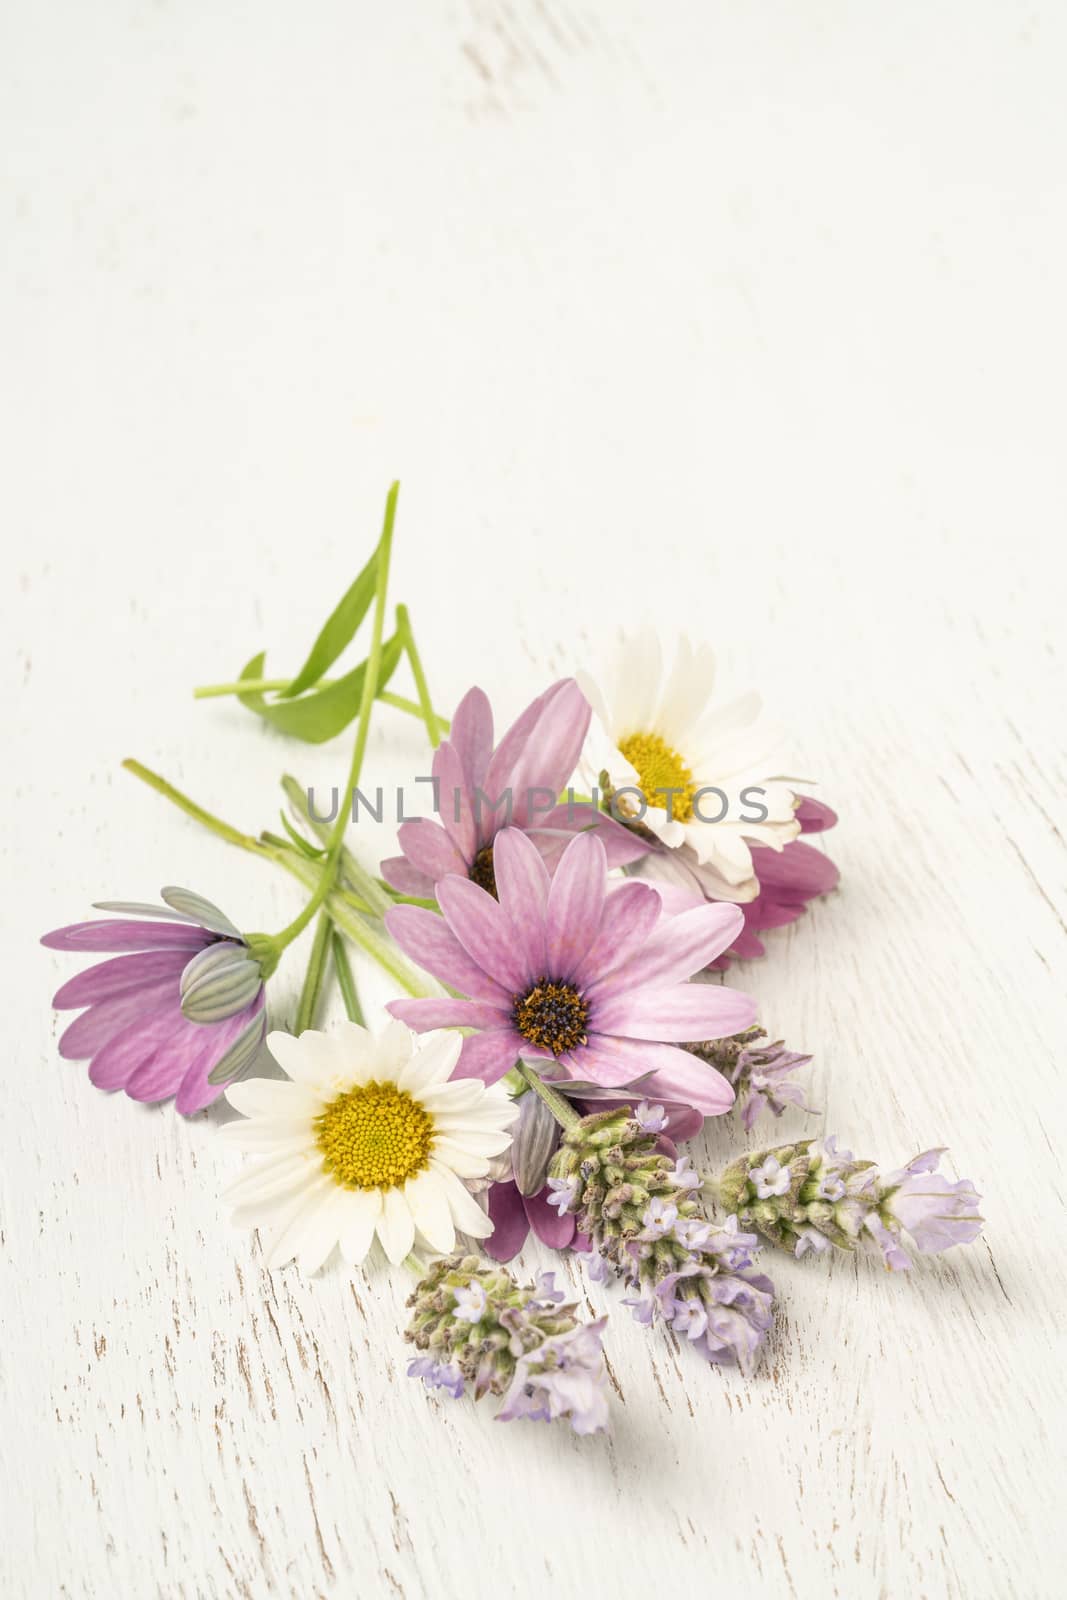 colorful bouquet of spring flowers on a wooden table with copy space